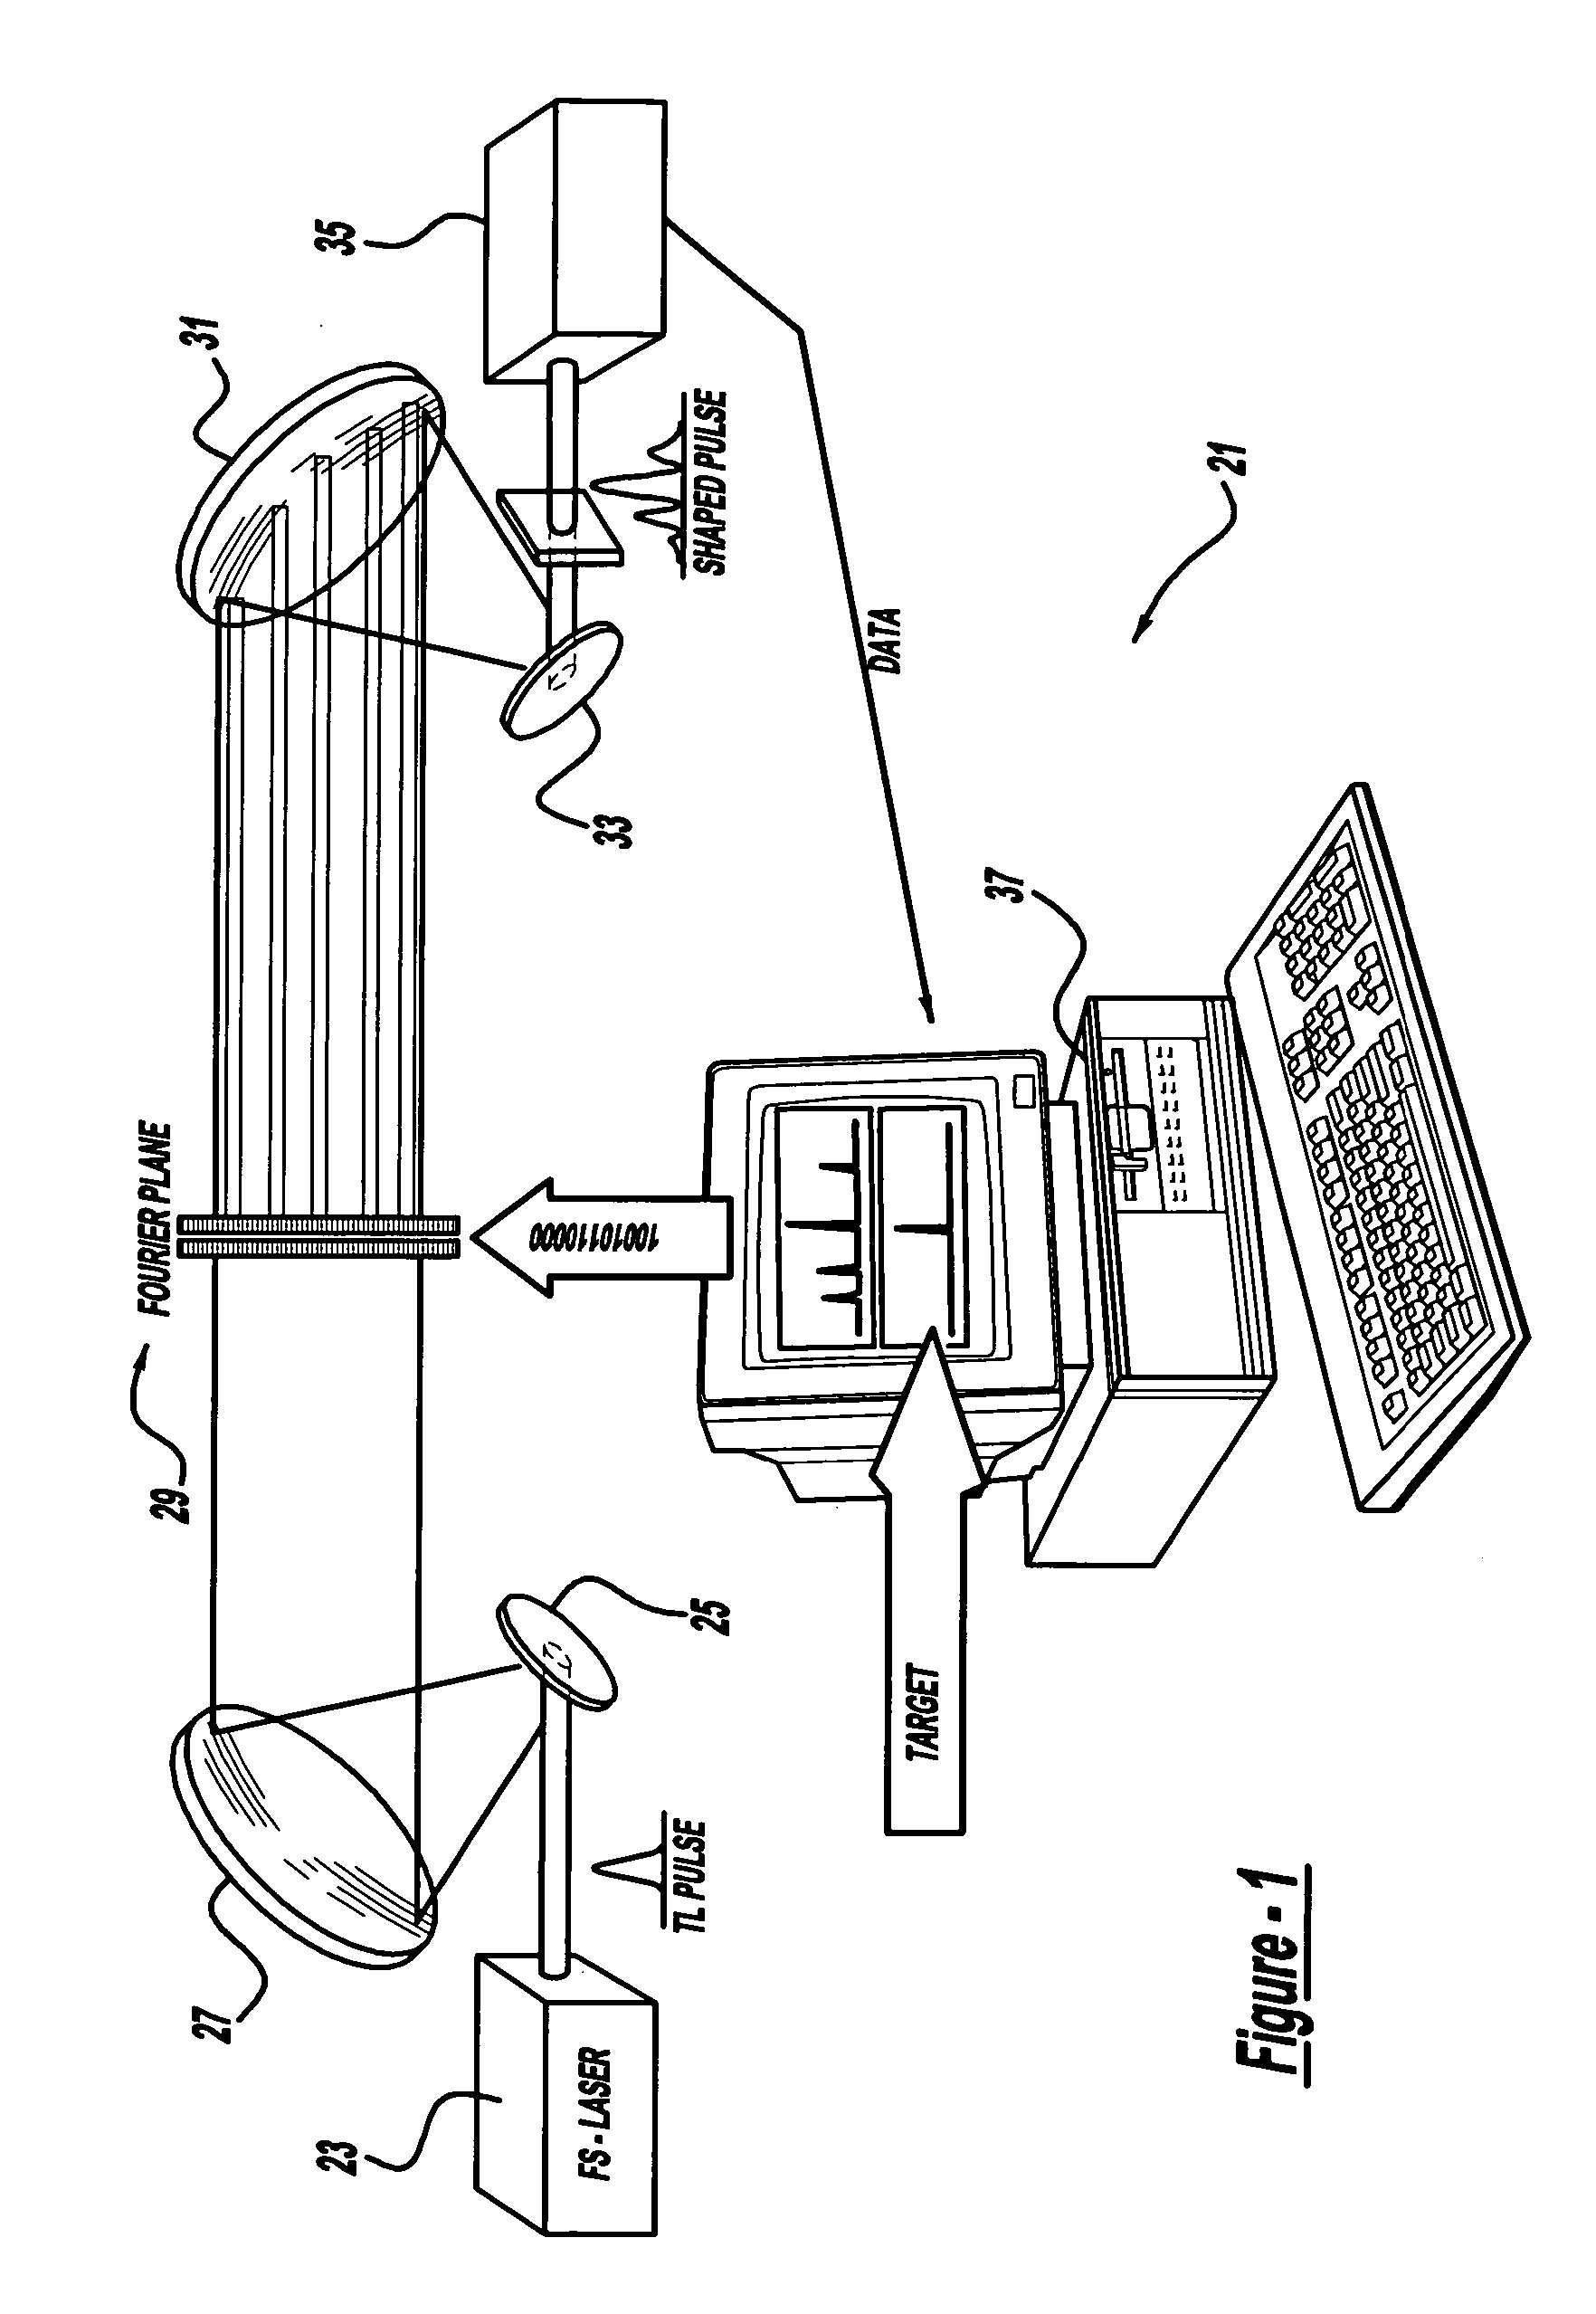 Control system and apparatus for use with ultra-fast laser